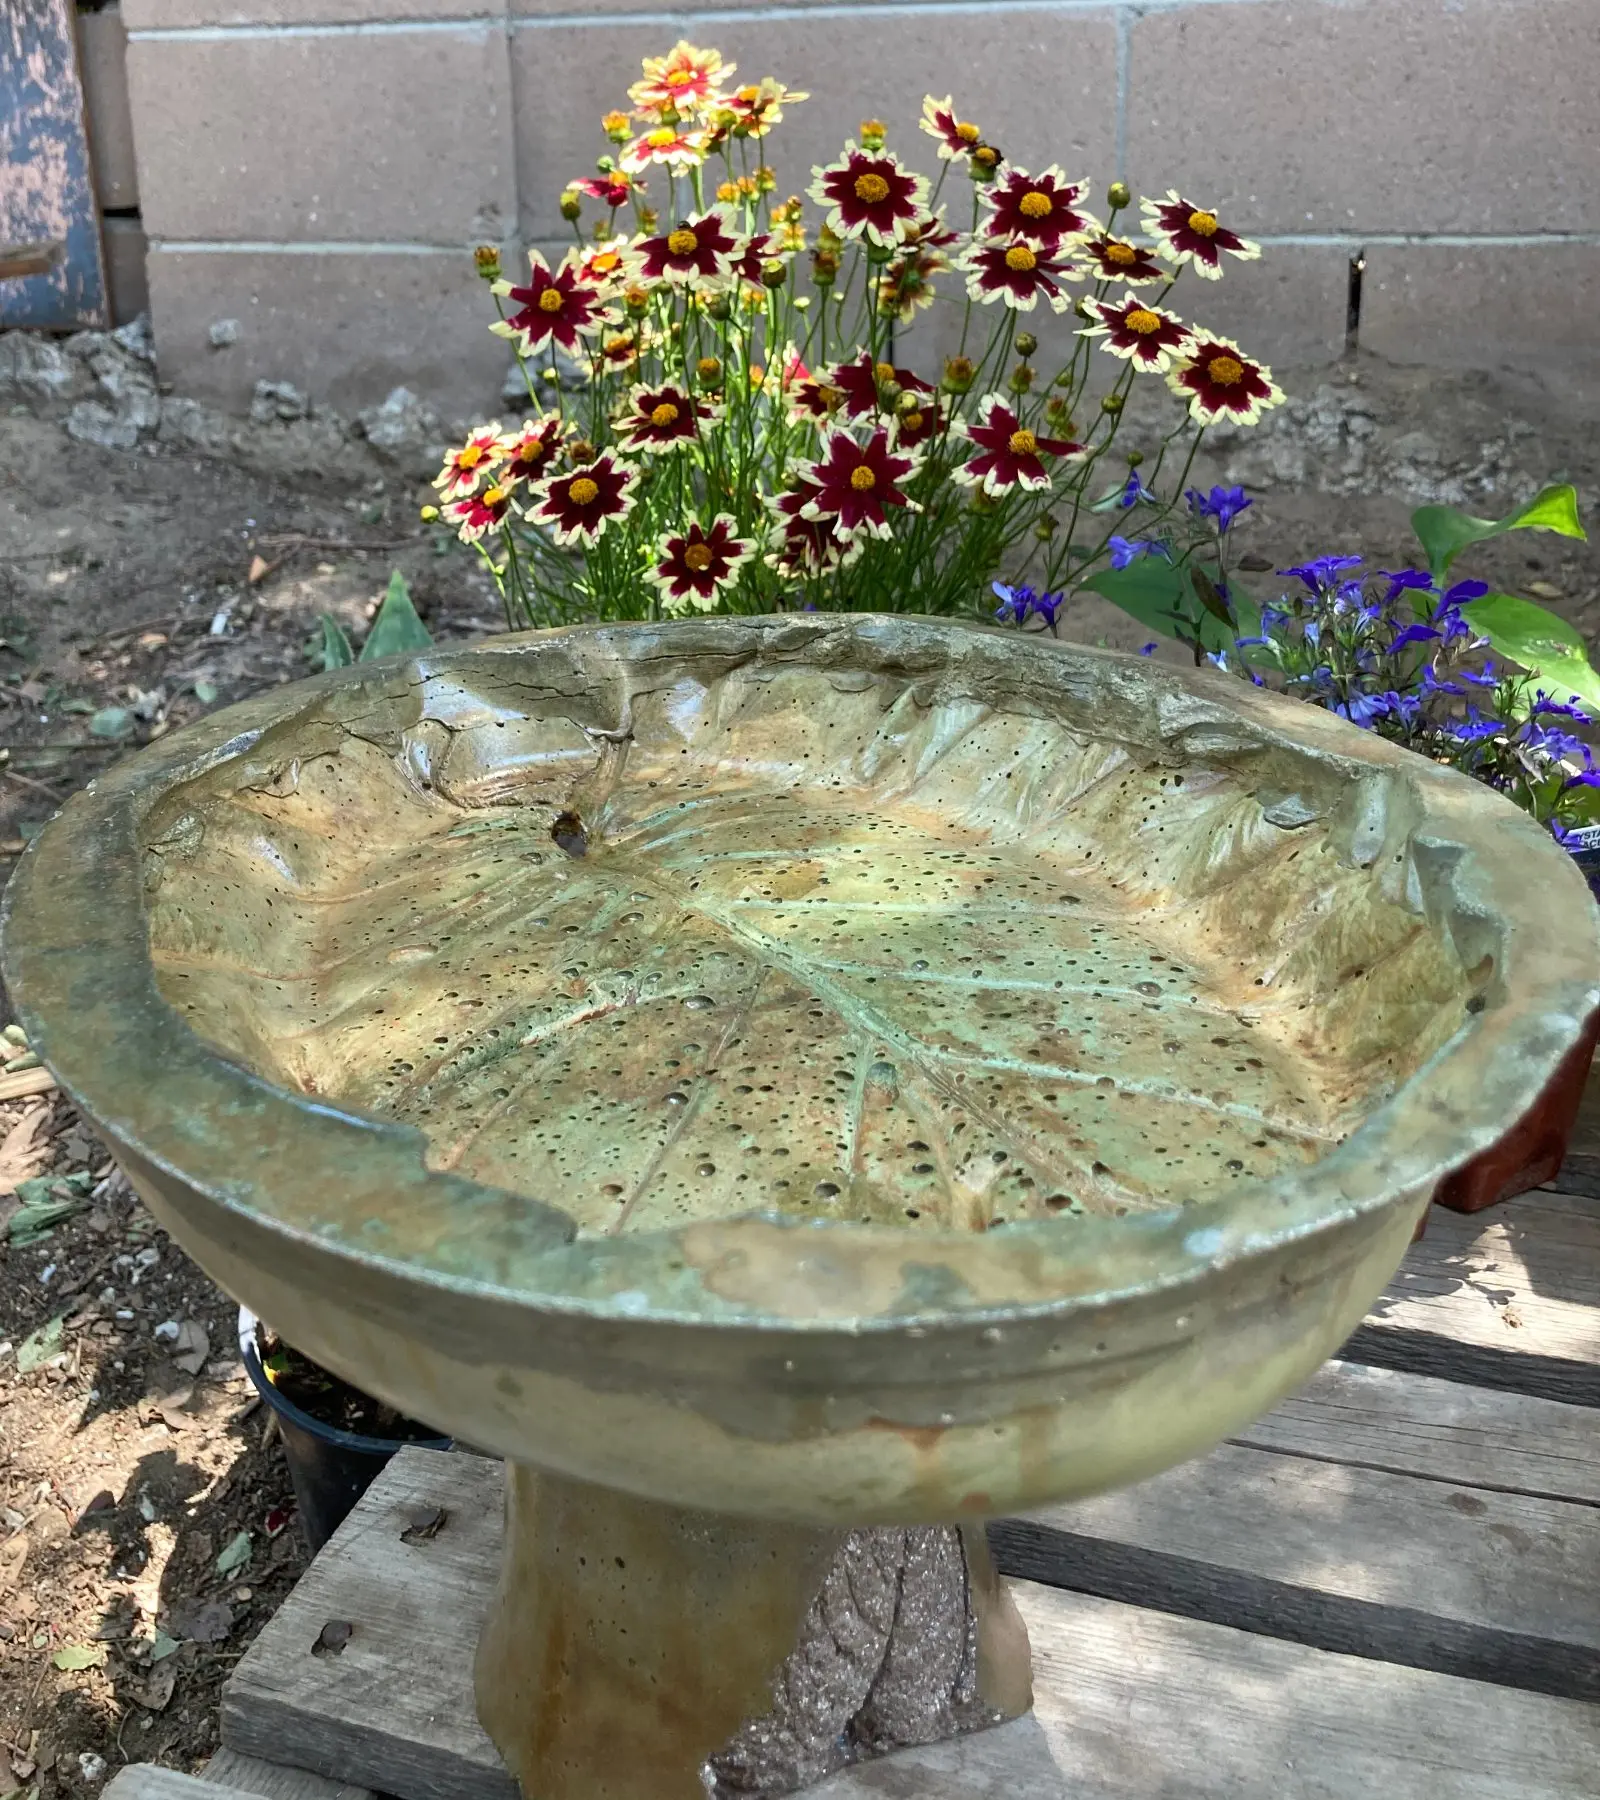 A tastefully stained bird bath showing the successful blending of two EverStain colors. The uneven surface and numerous crevices and divots of the bird bath are evident, demonstrating the intricate nature of the project